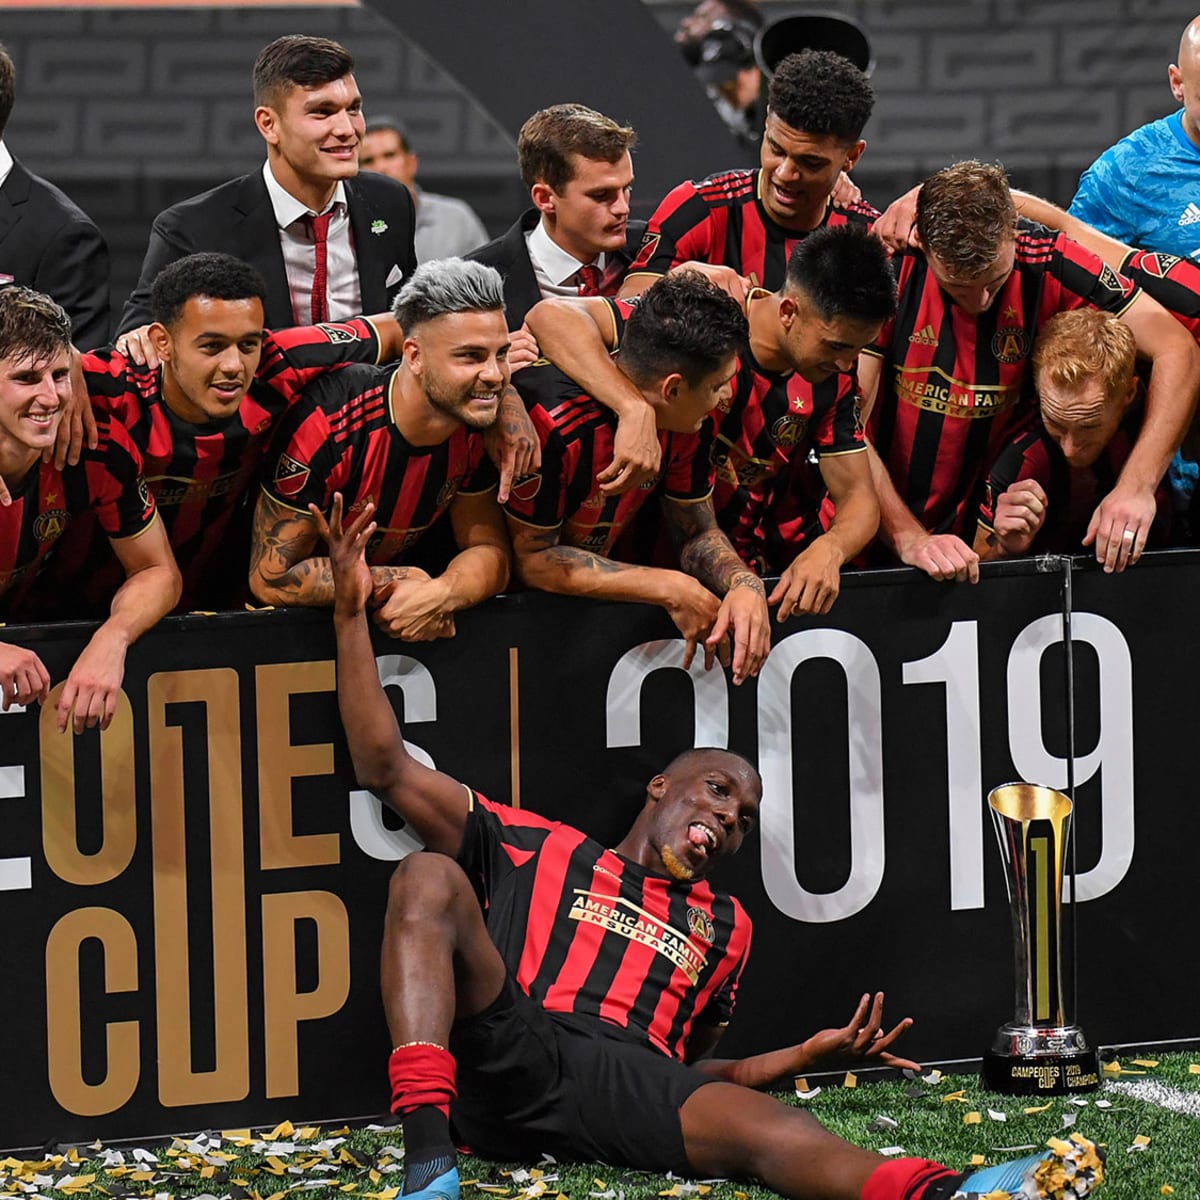 2020 Leagues Cup details released: MLS and Liga MX clubs, dates